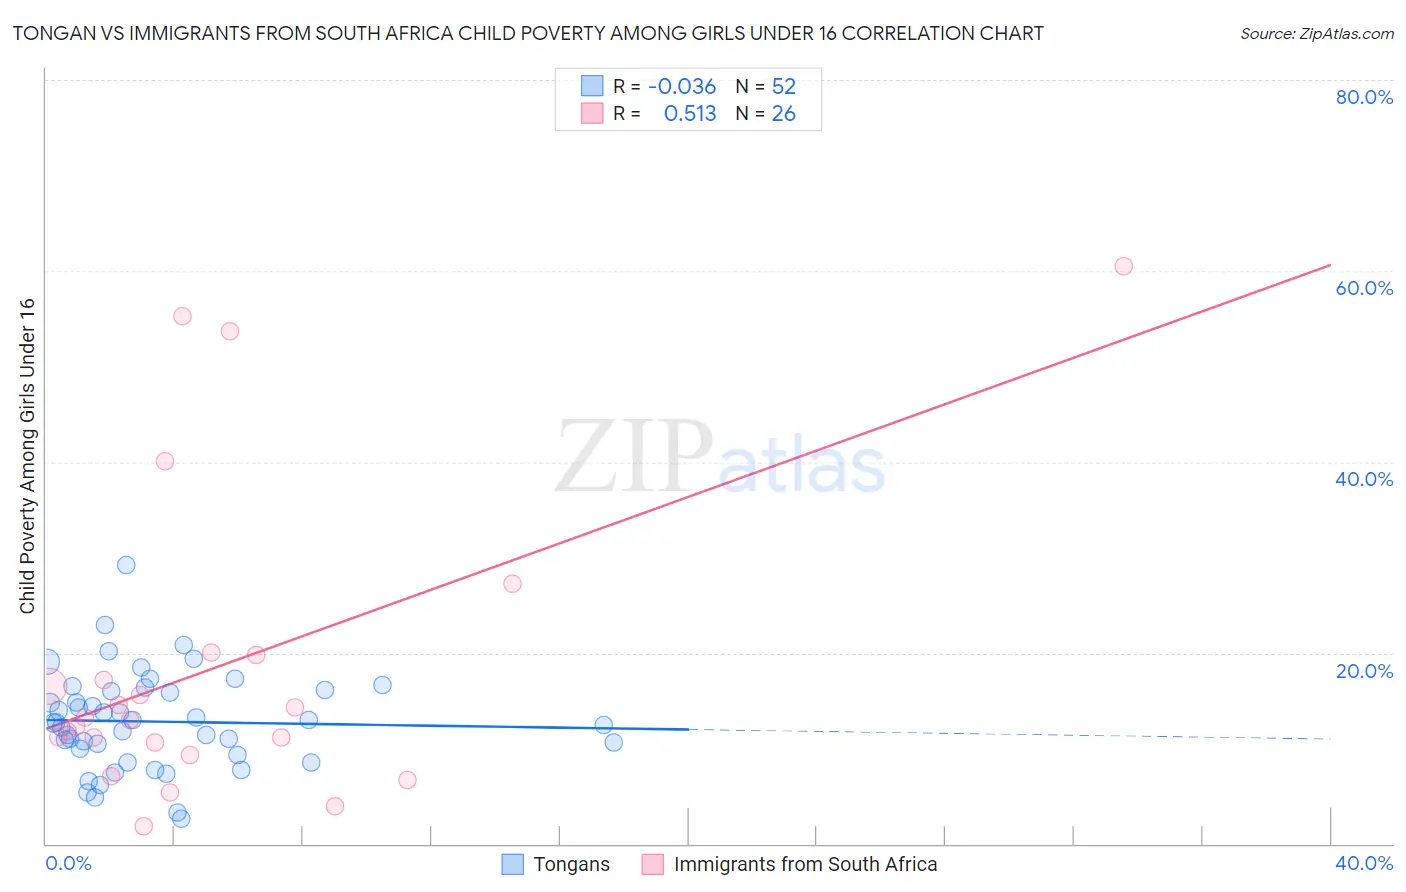 Tongan vs Immigrants from South Africa Child Poverty Among Girls Under 16